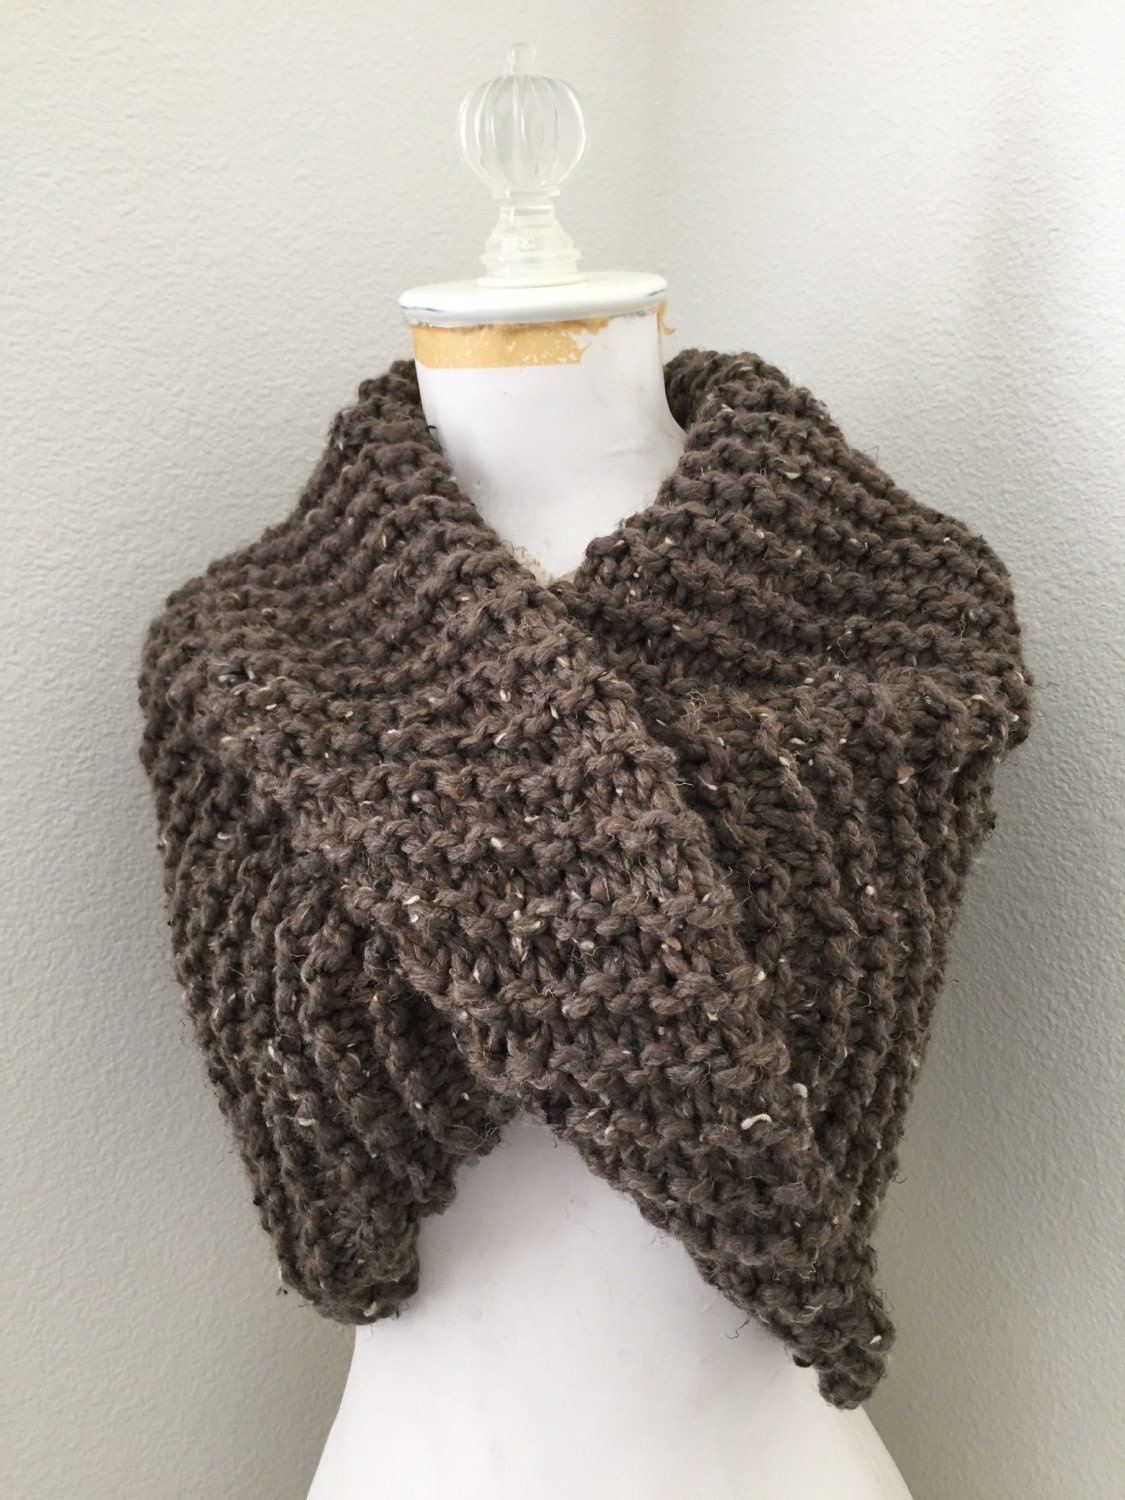 Chunky Knit Cowl Infinity Knit Cowl Oatmeal Knit Cowl Loop | Etsy